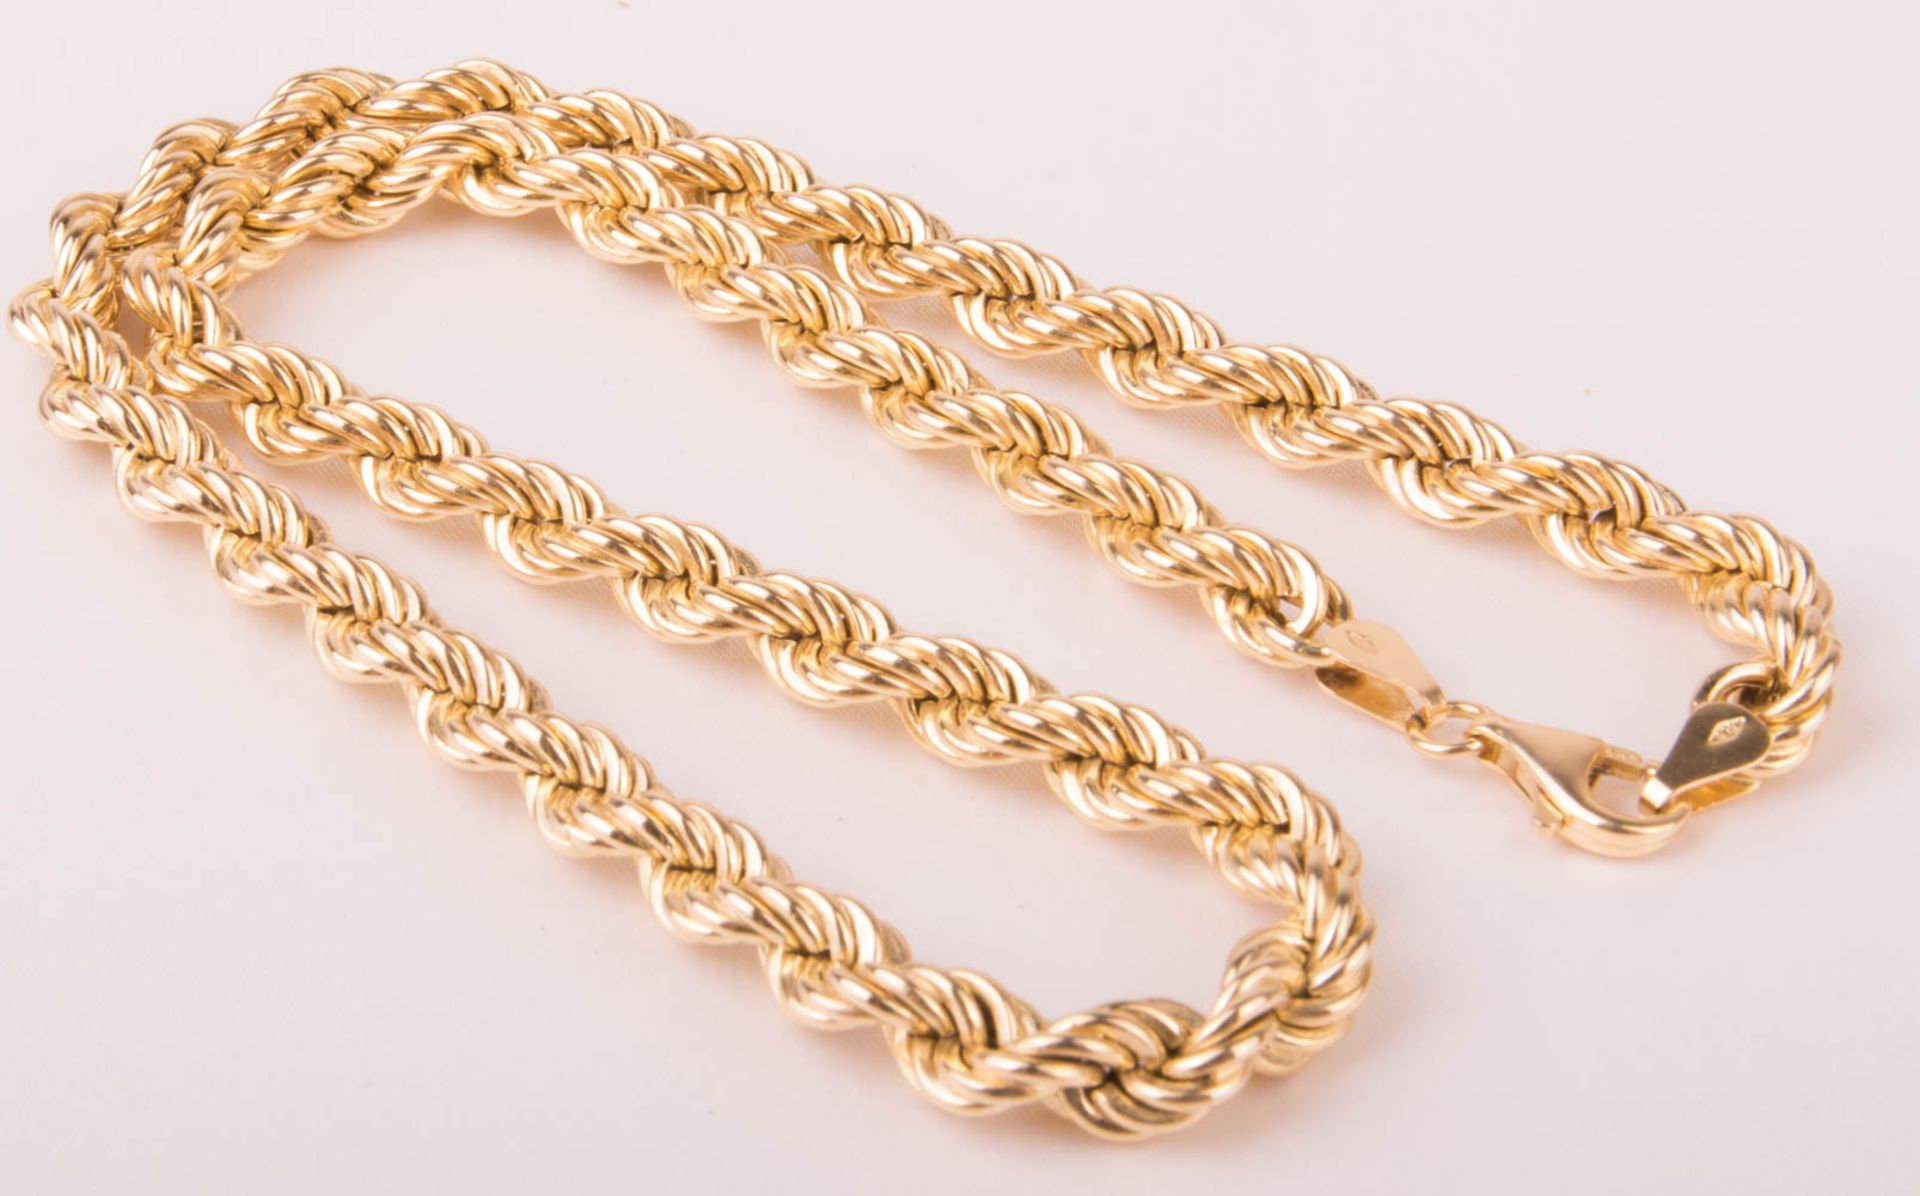 Twisted necklace, 585 yellow gold.